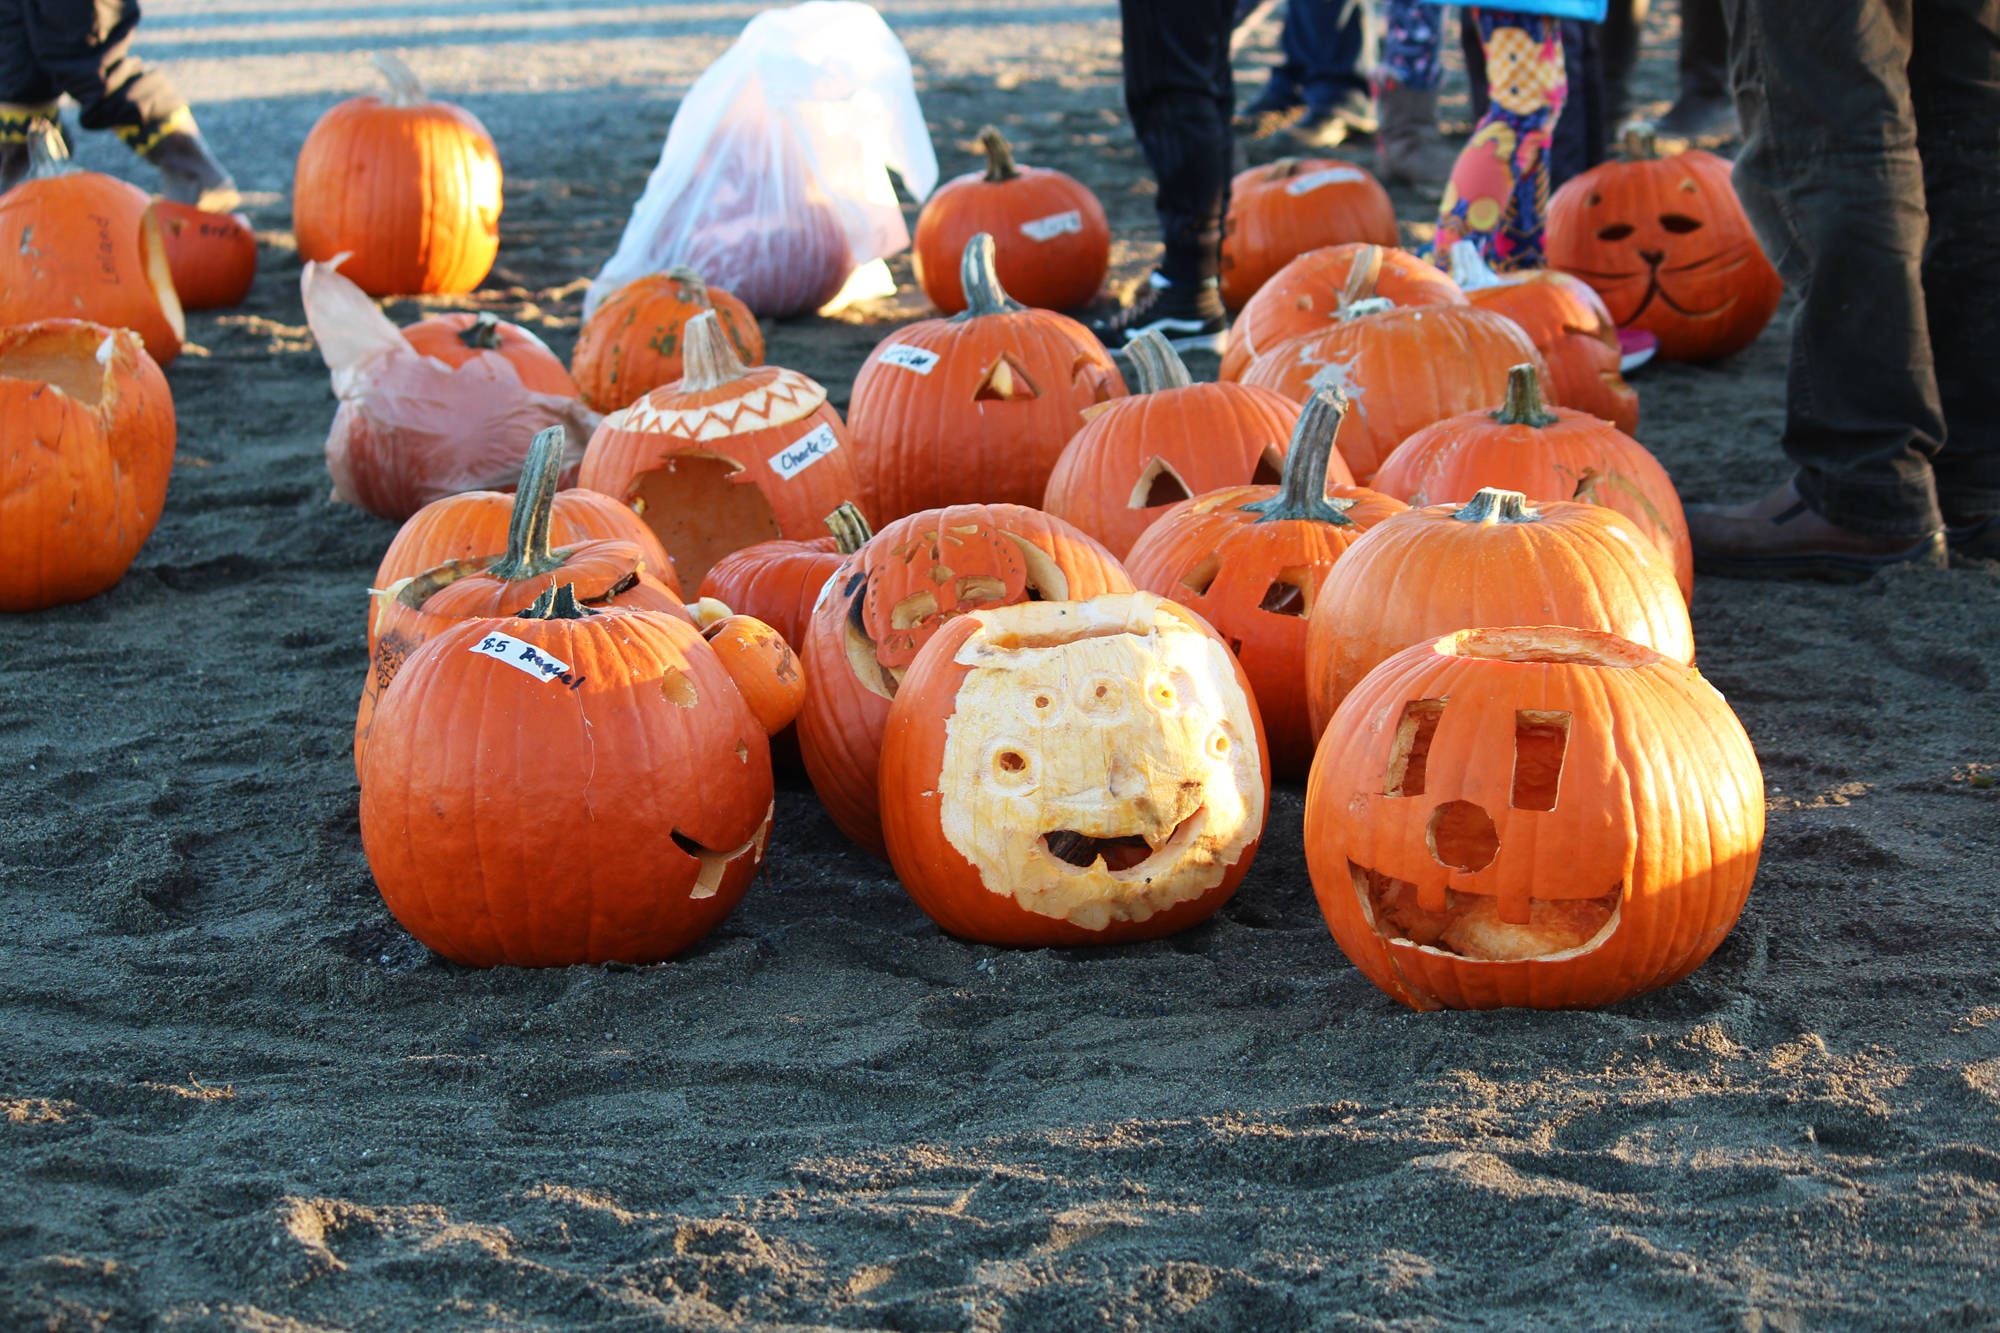 Several carved pumpkins await their turn to be flung across a field by a catapult during West Homer Elemetnary Schools Punkin Chuckin’ fundraising event Friday, Nov. 3, 2017 at the school in Homer, Alaska. (Photo by Megan Pacer/Homer News)